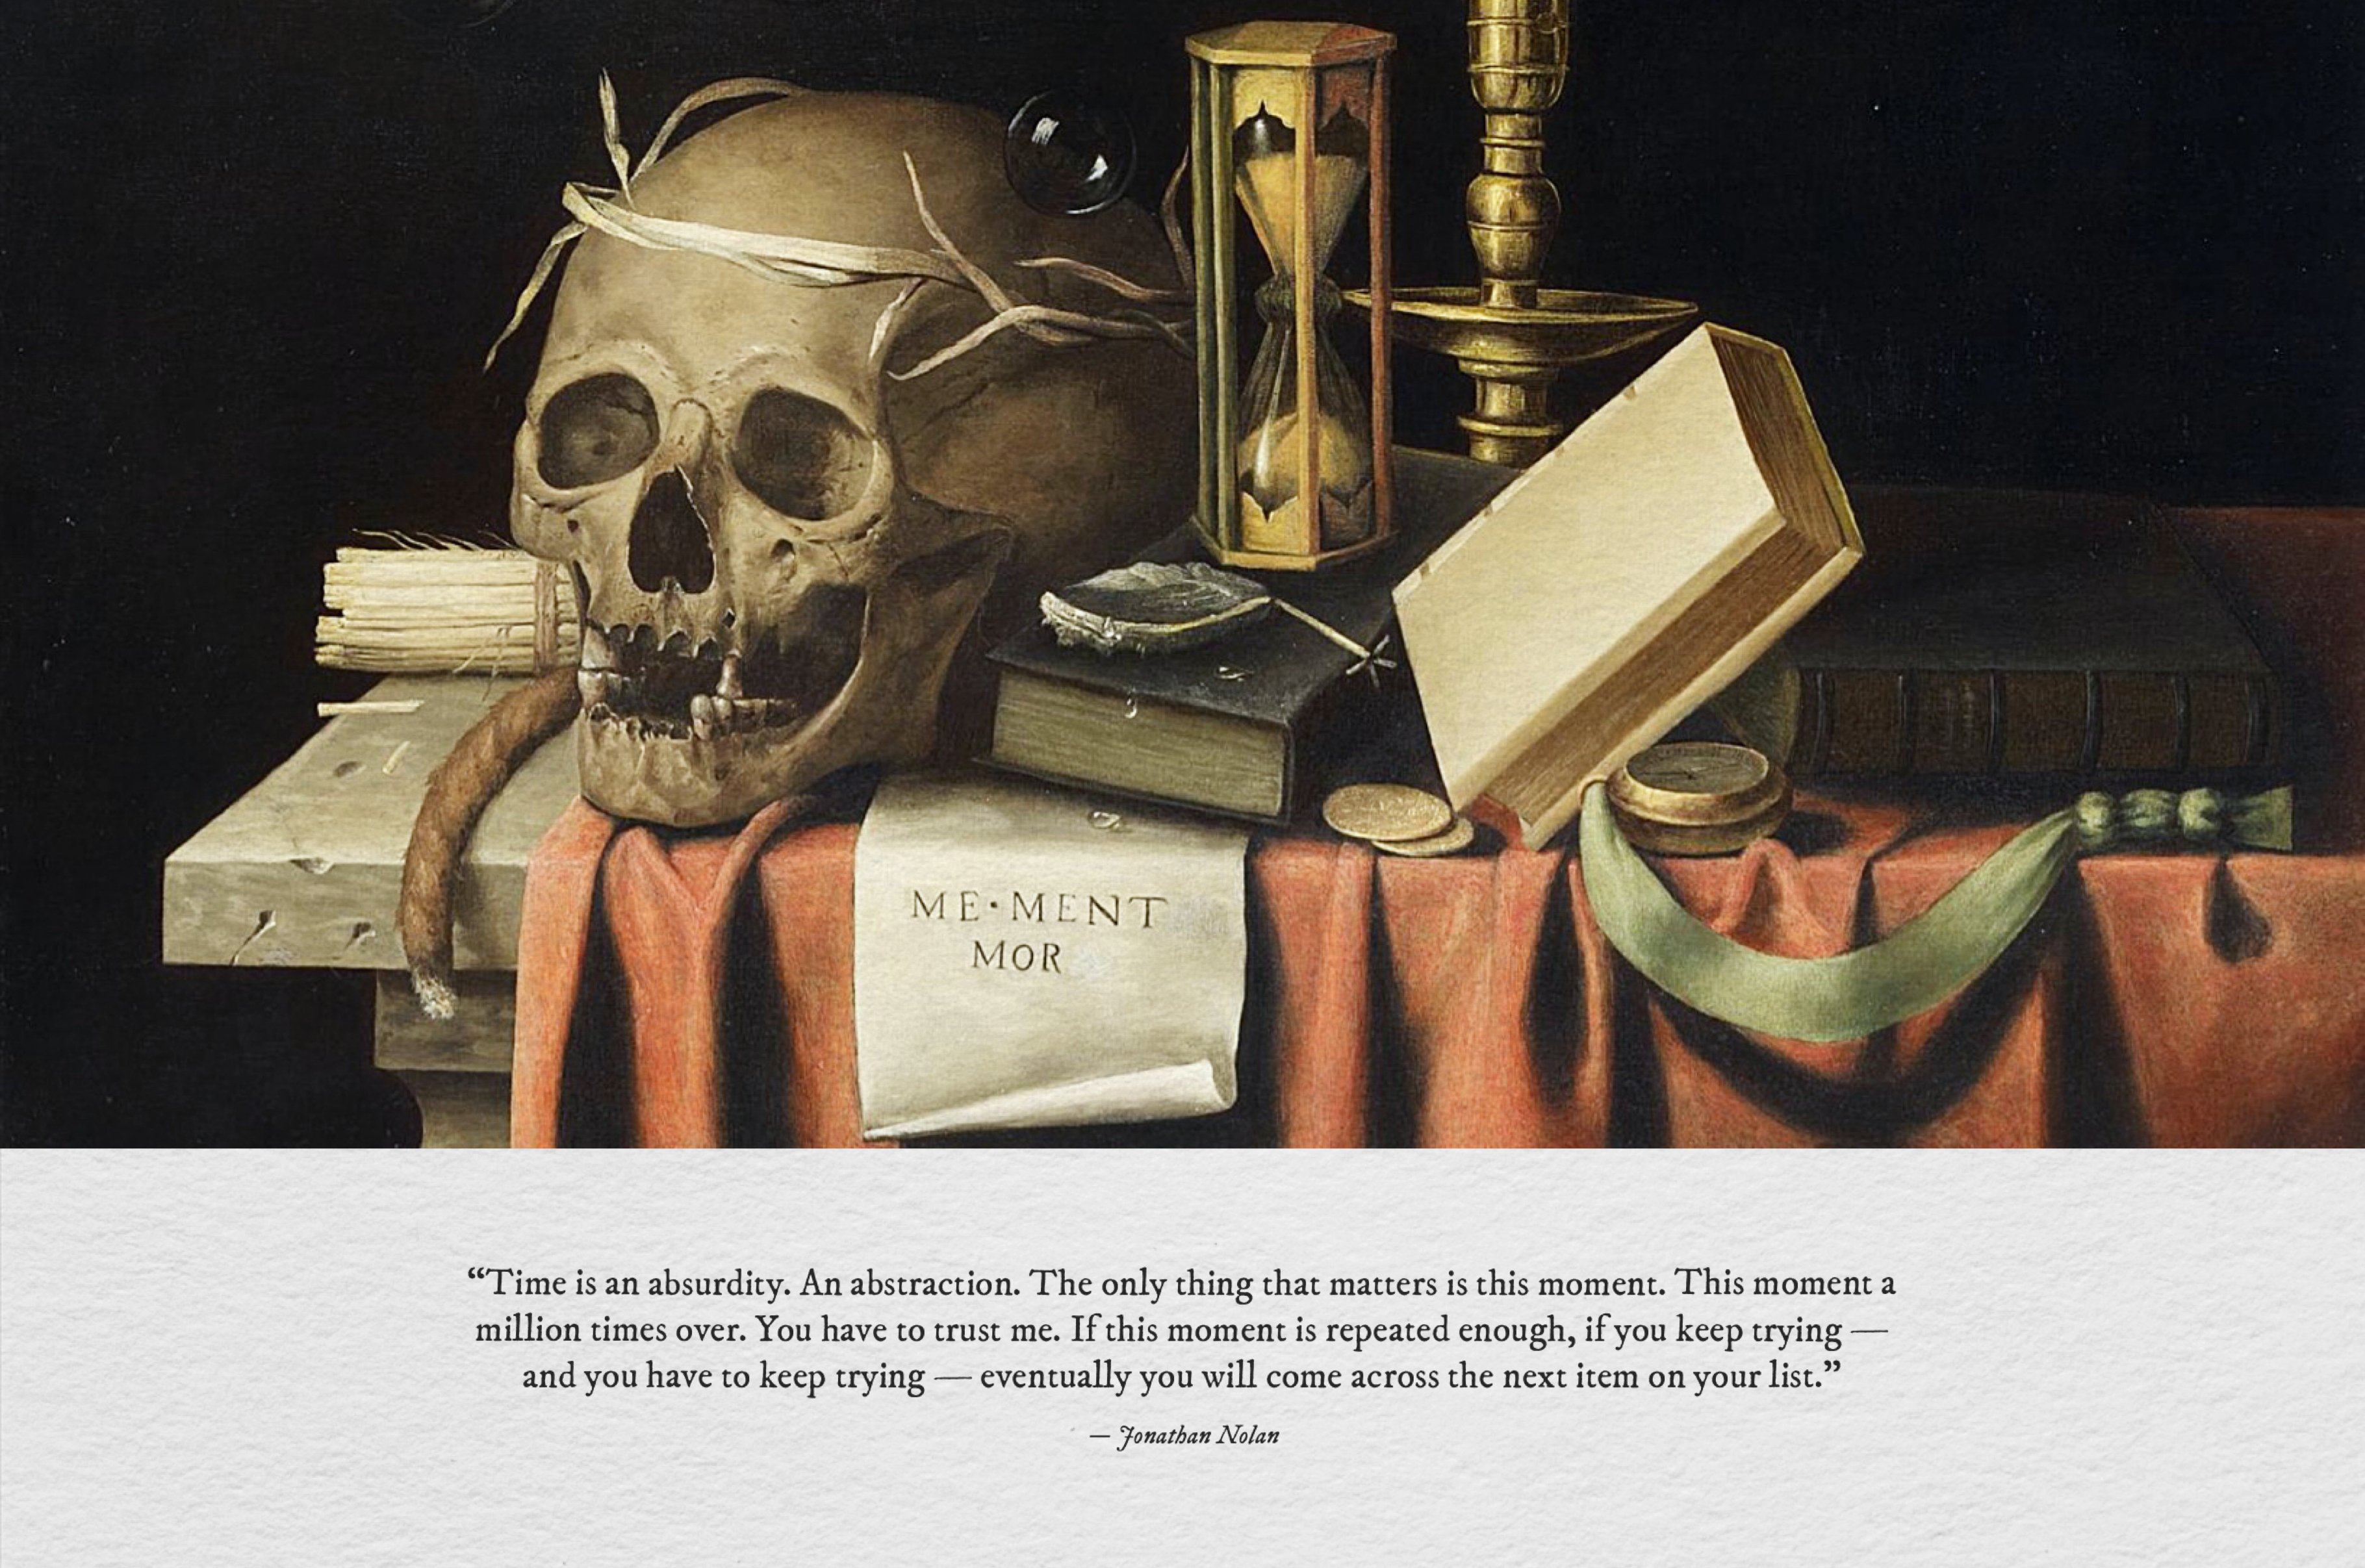 Retro art picture with the skull and books.